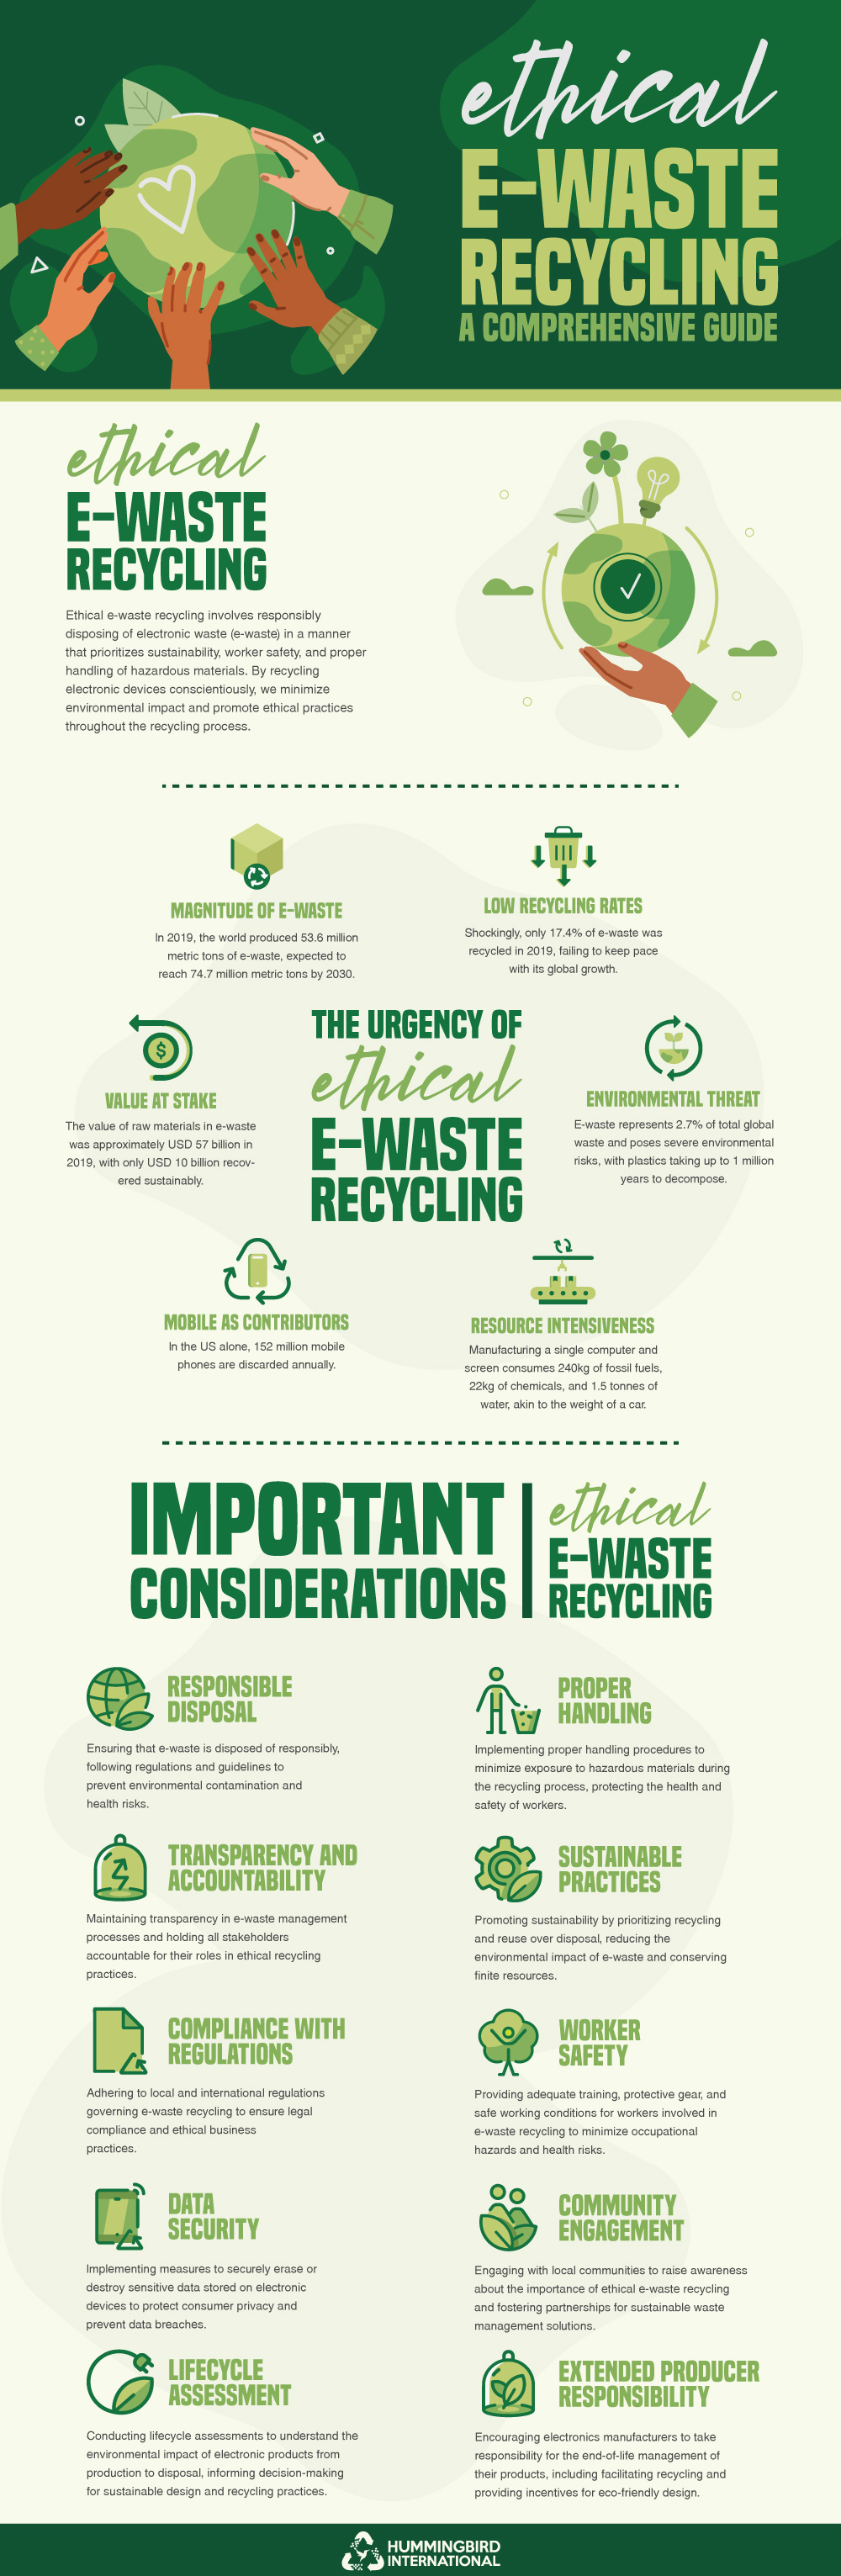 The Skinny on Ethical E-Waste Recycling